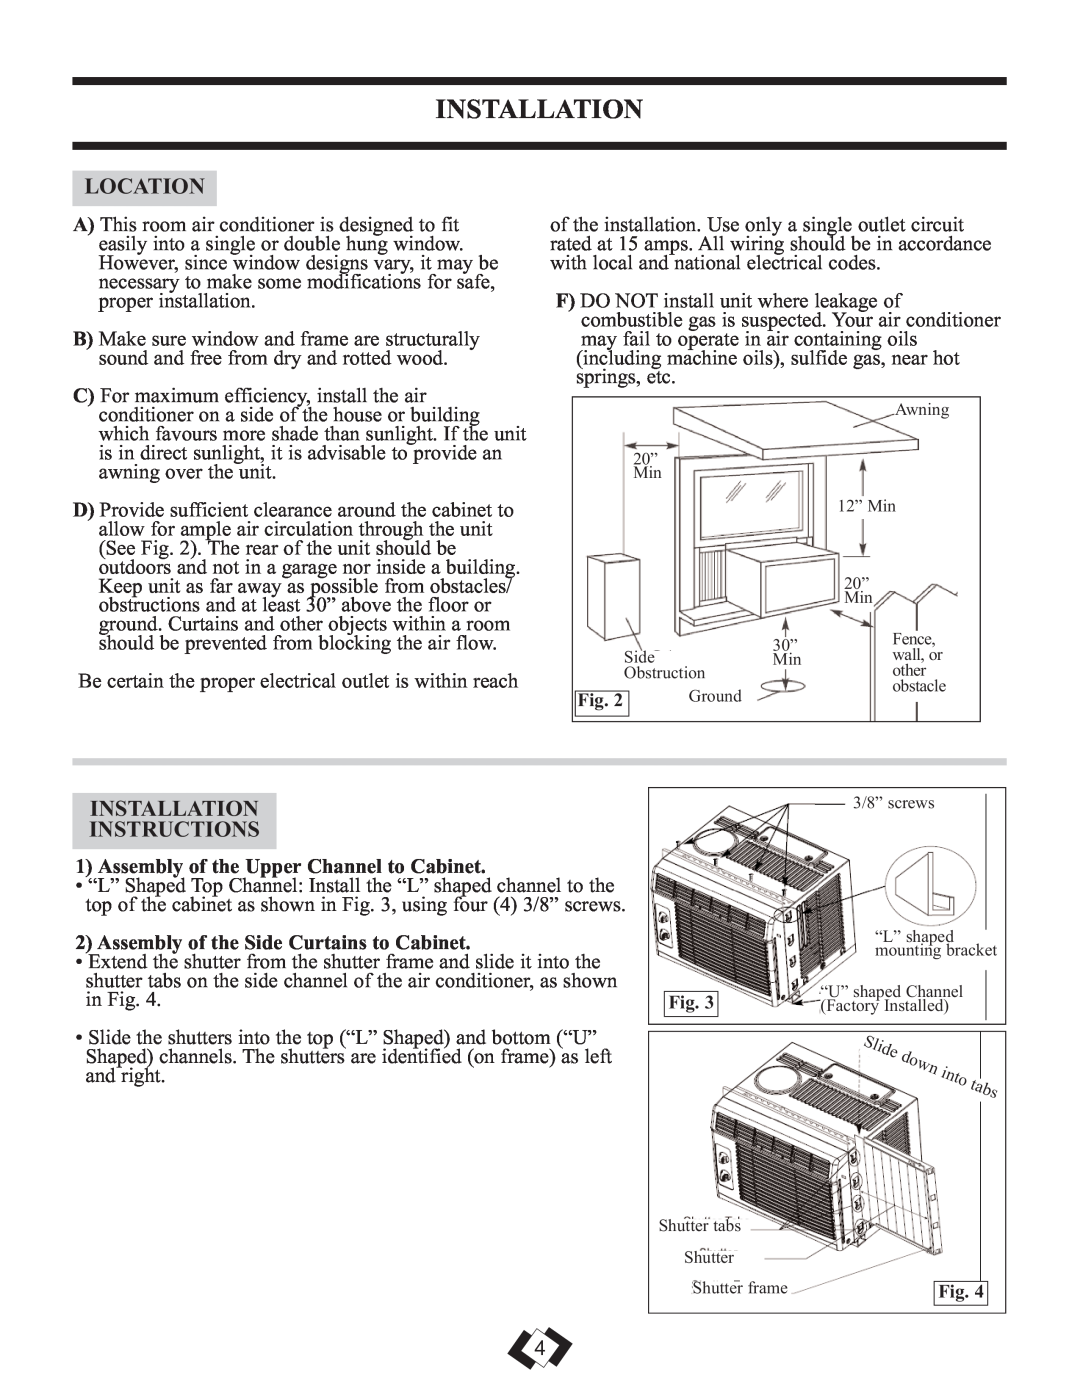 Danby DAC12010E, DAC8010E, DAC10010E Location, Installation Instructions, Assembly of the Upper Channel to Cabinet 